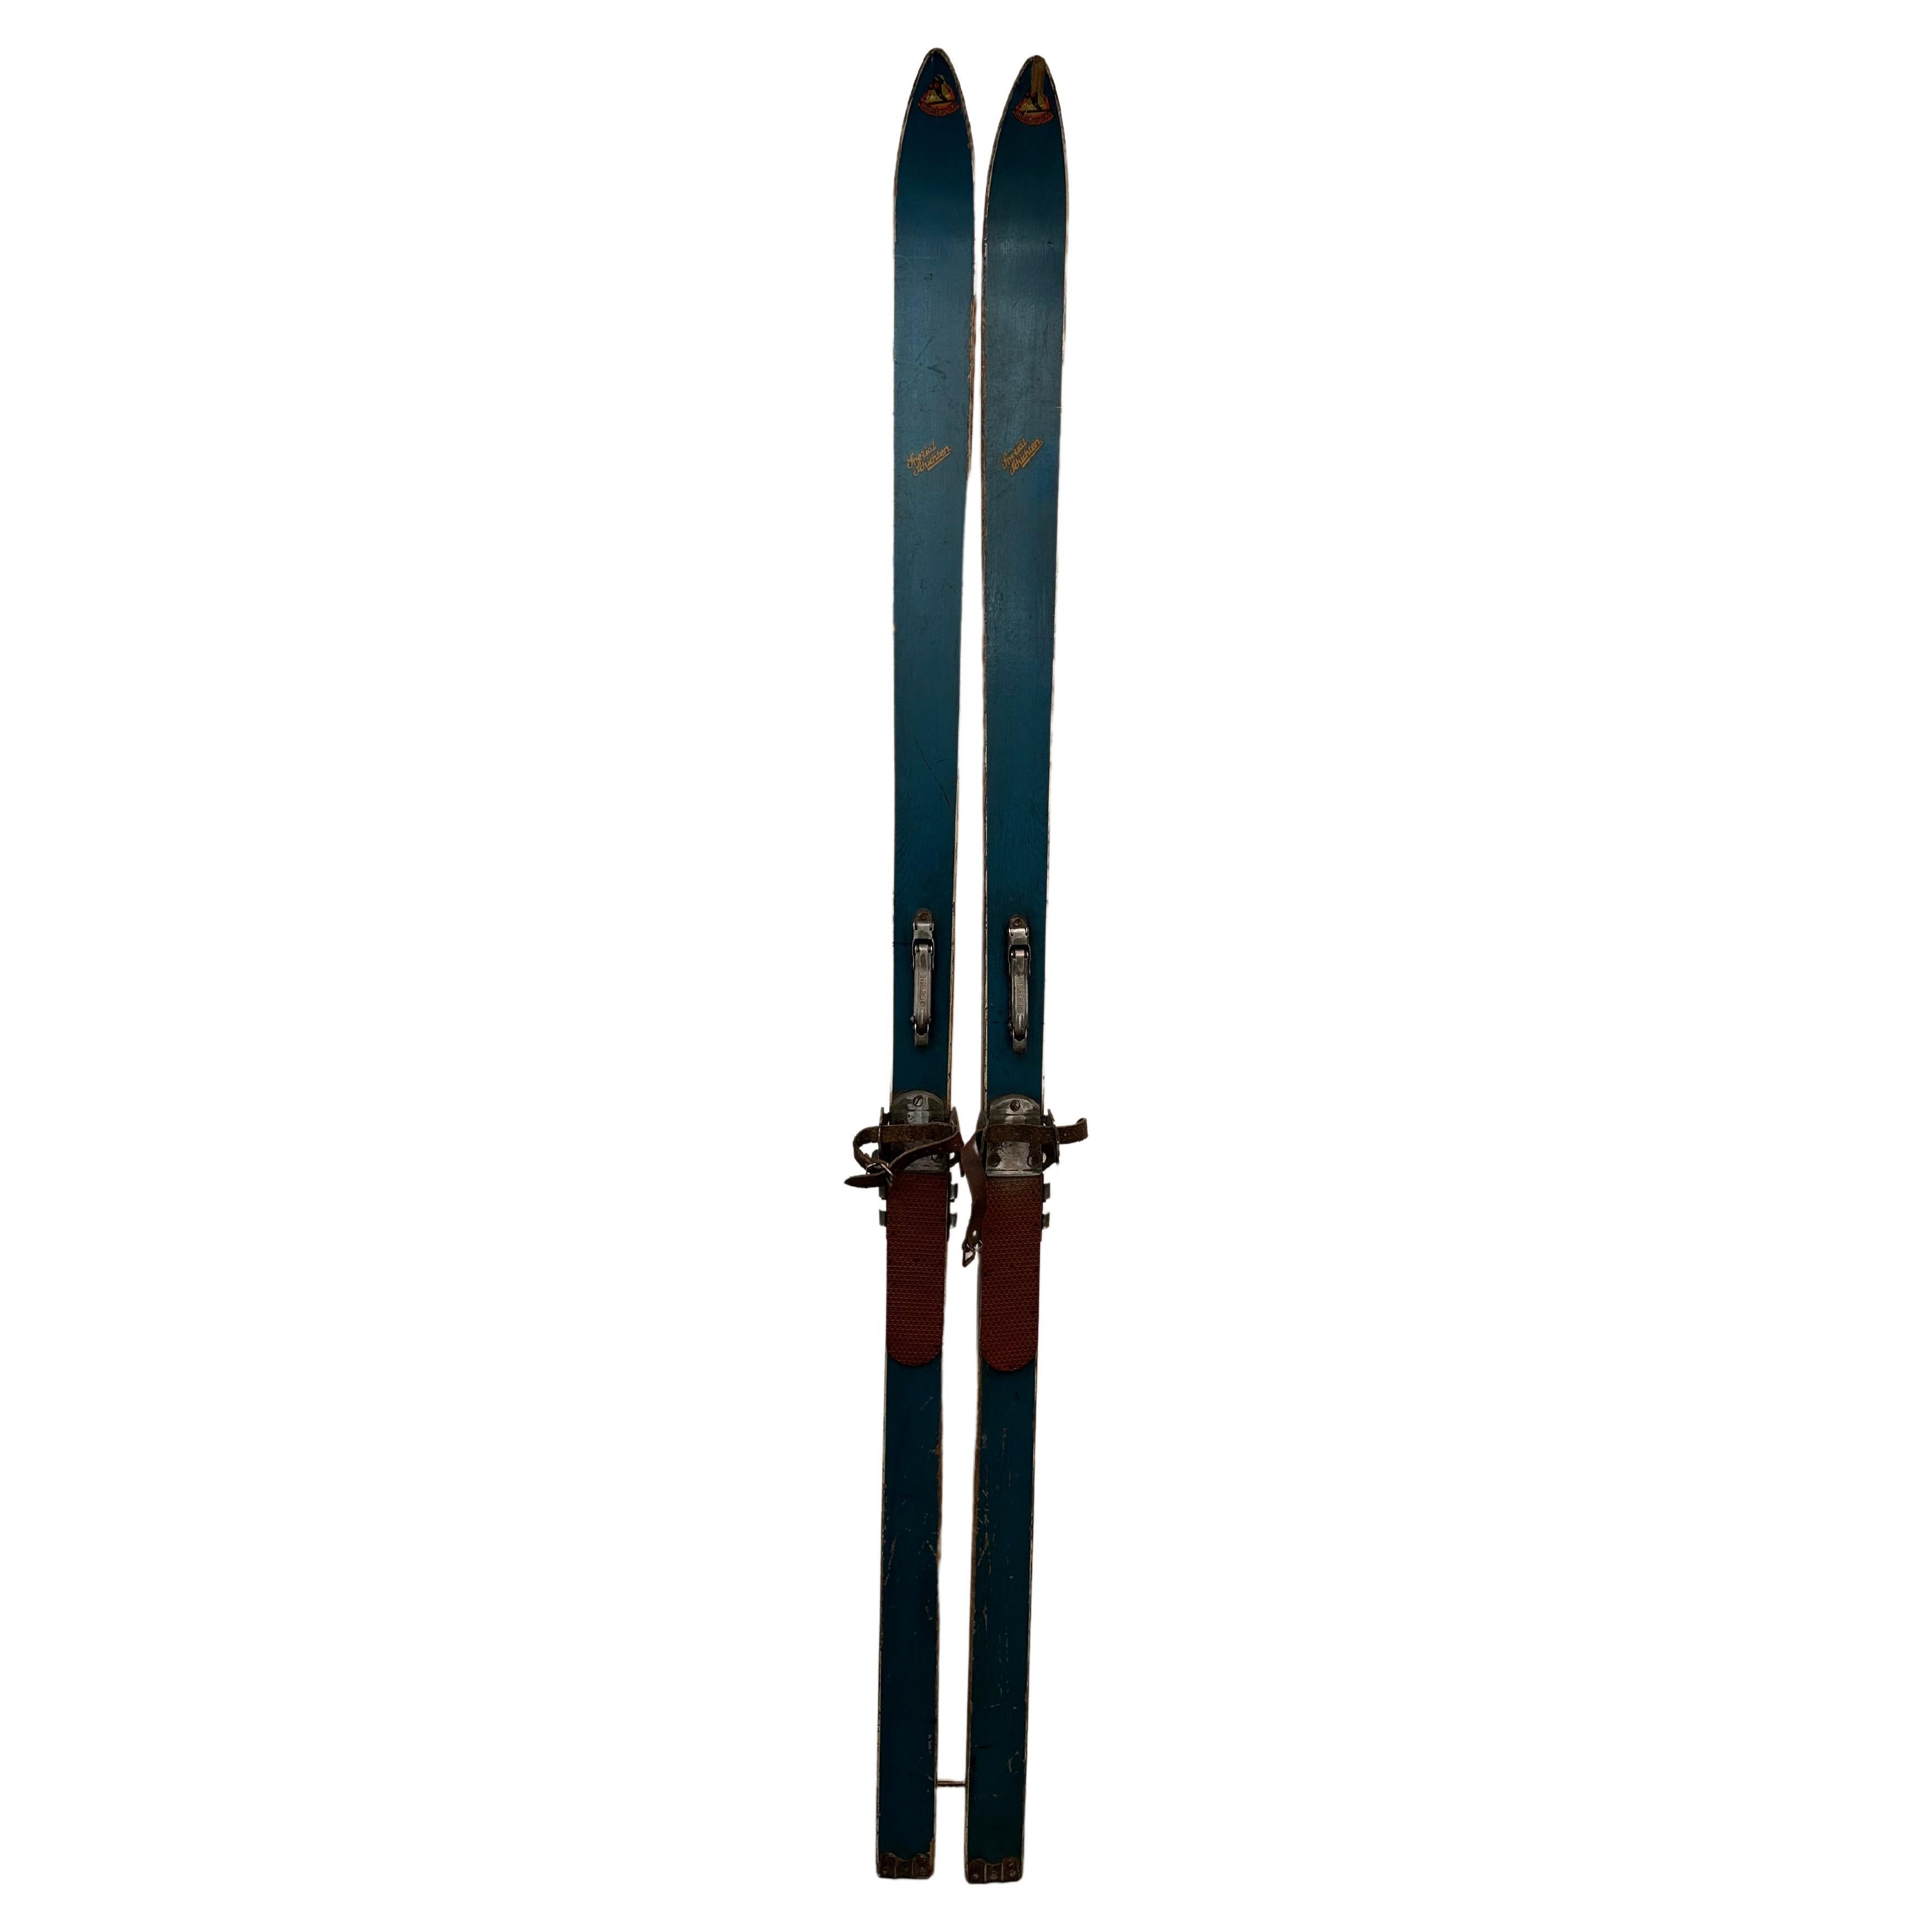 Vintage Circa 1950s Wooden Skis with Bindings by Spezial Schichten Hohnberg For Sale